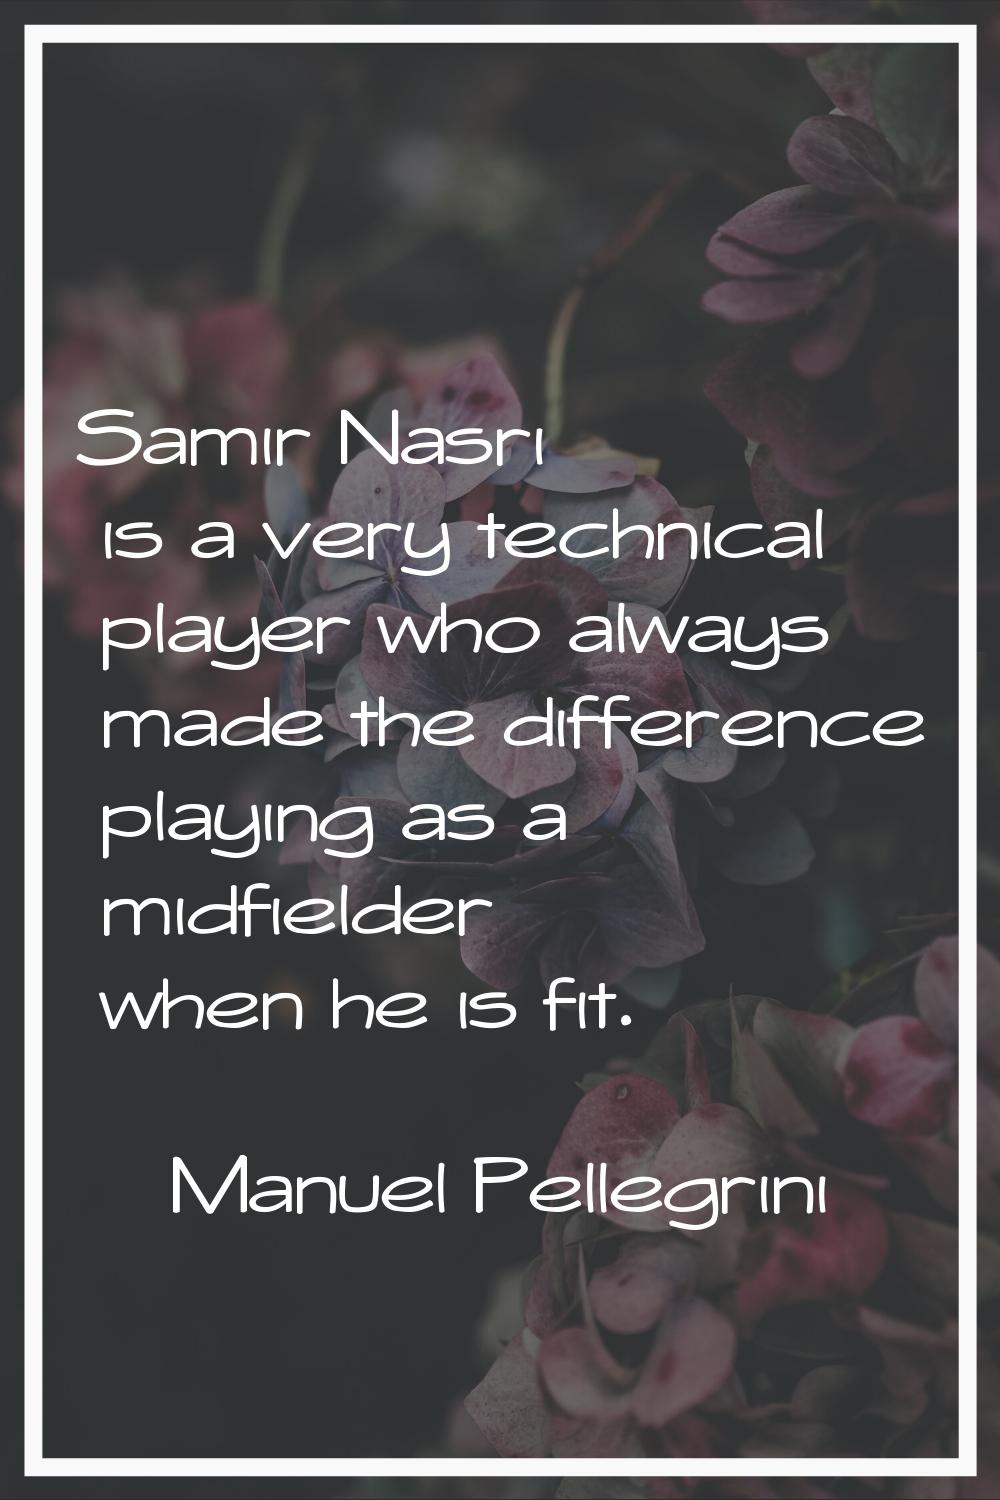 Samir Nasri is a very technical player who always made the difference playing as a midfielder when 